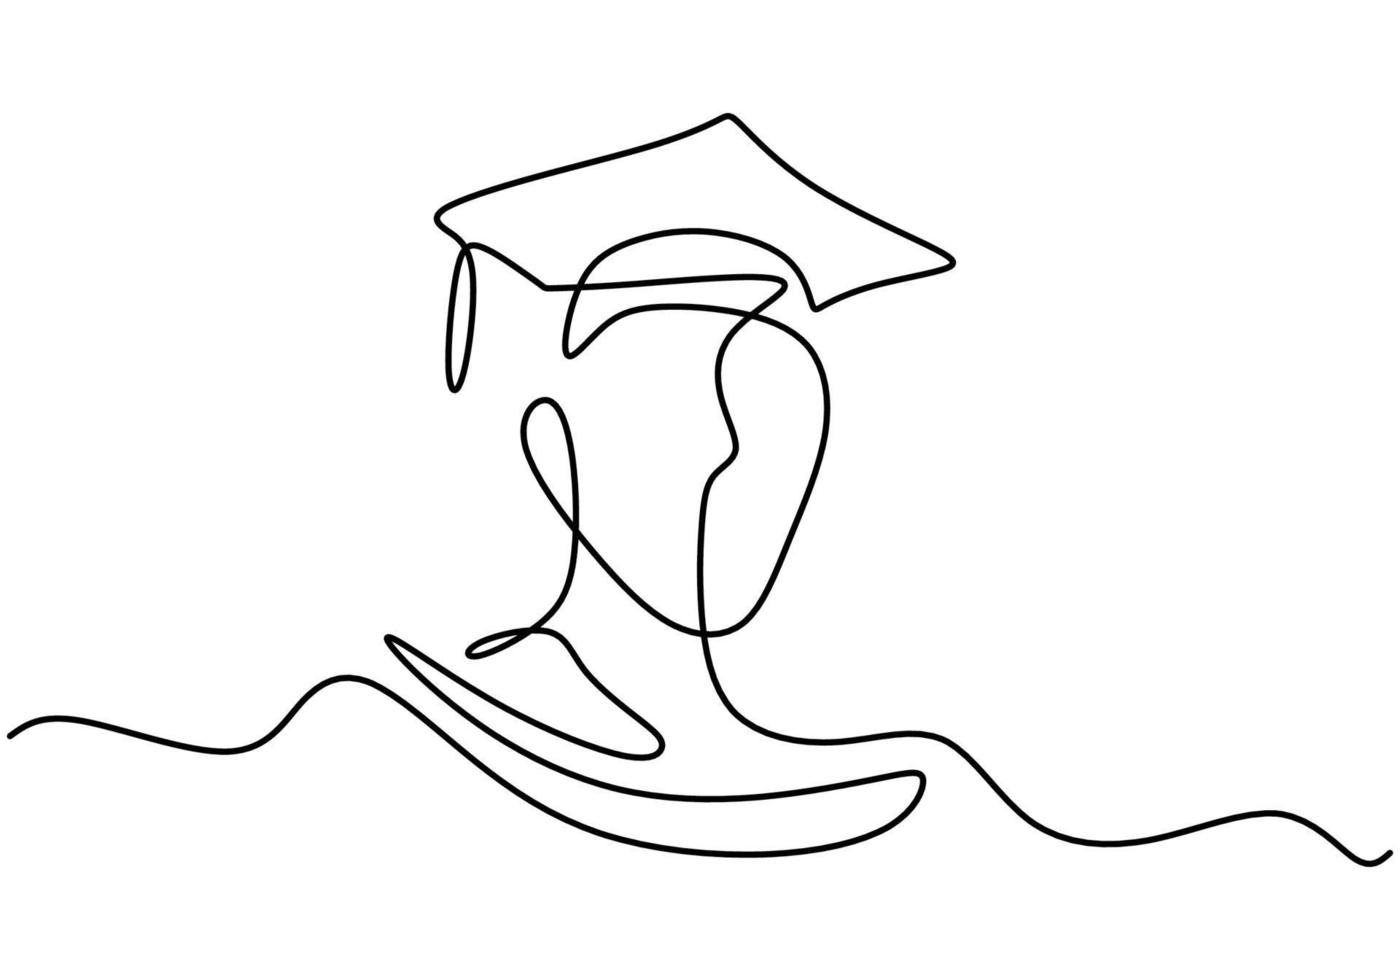 Continuous one line art drawing of happy graduation student wearing graduation hat. College, school pupil celebrating graduation theme isolated on white background. Vector illustration